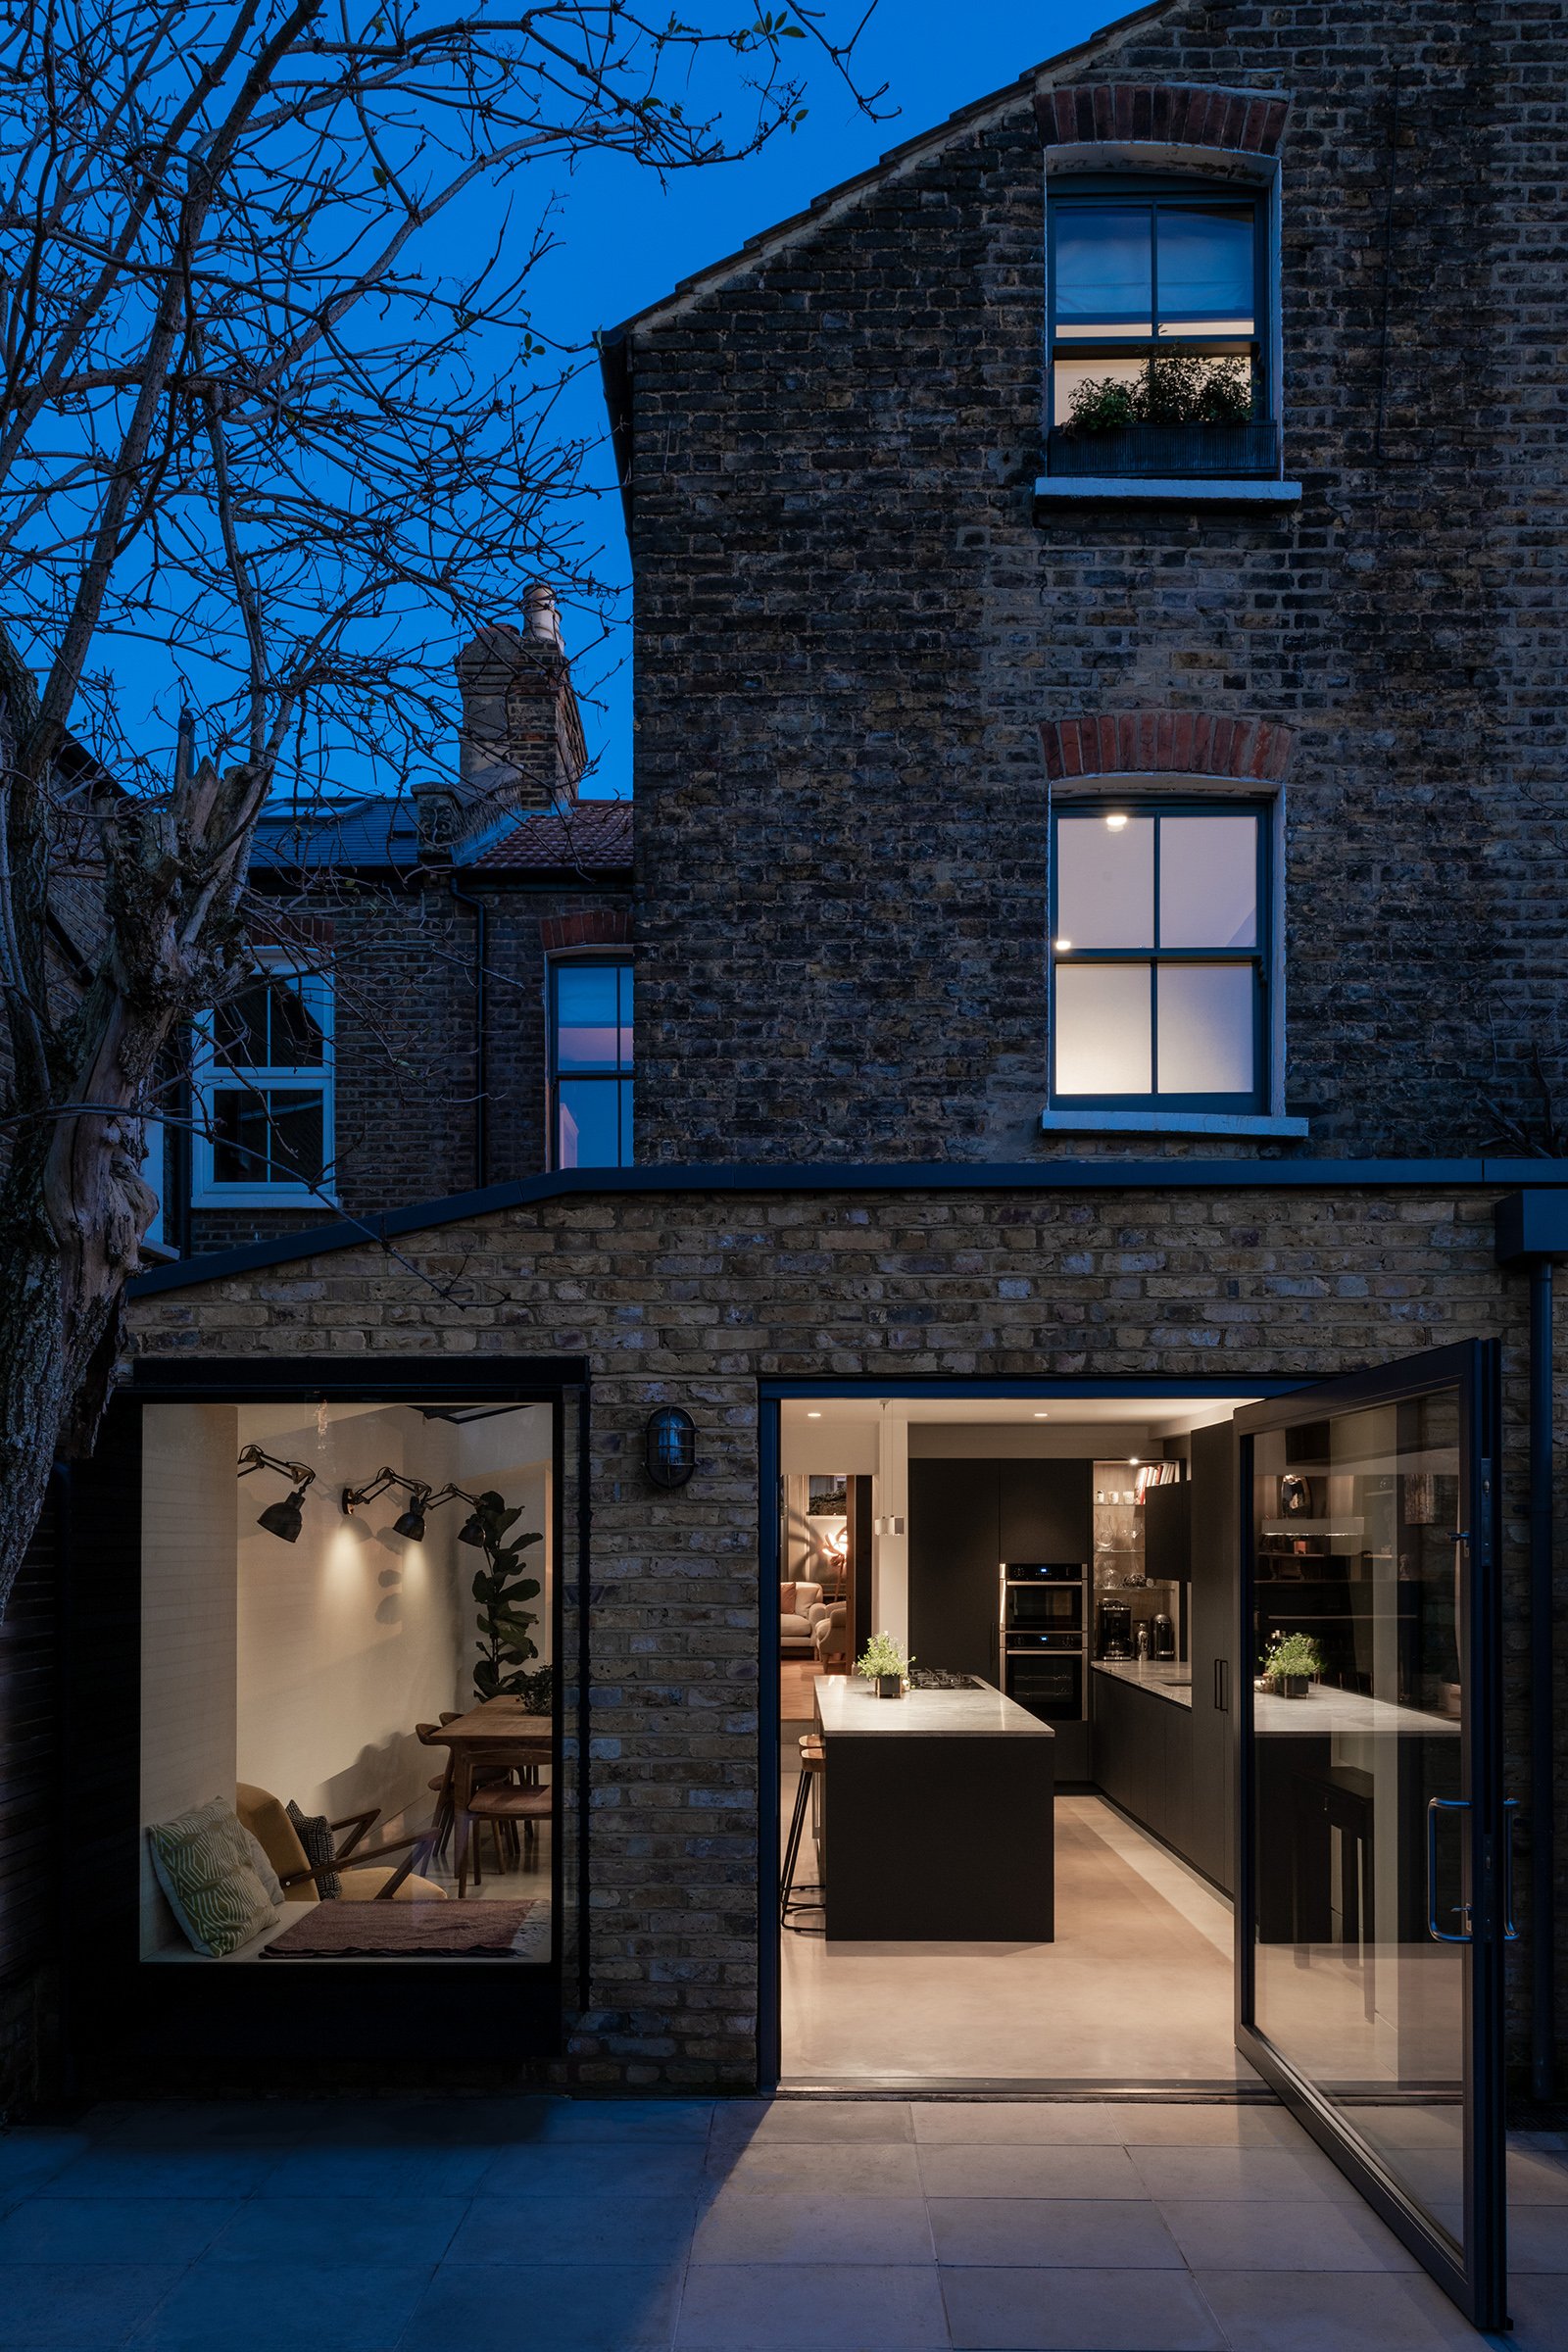 2-mcdowall-road-victorian-house-extension-interior-design-architecture-london-uk-rider-stirland-architects.jpg